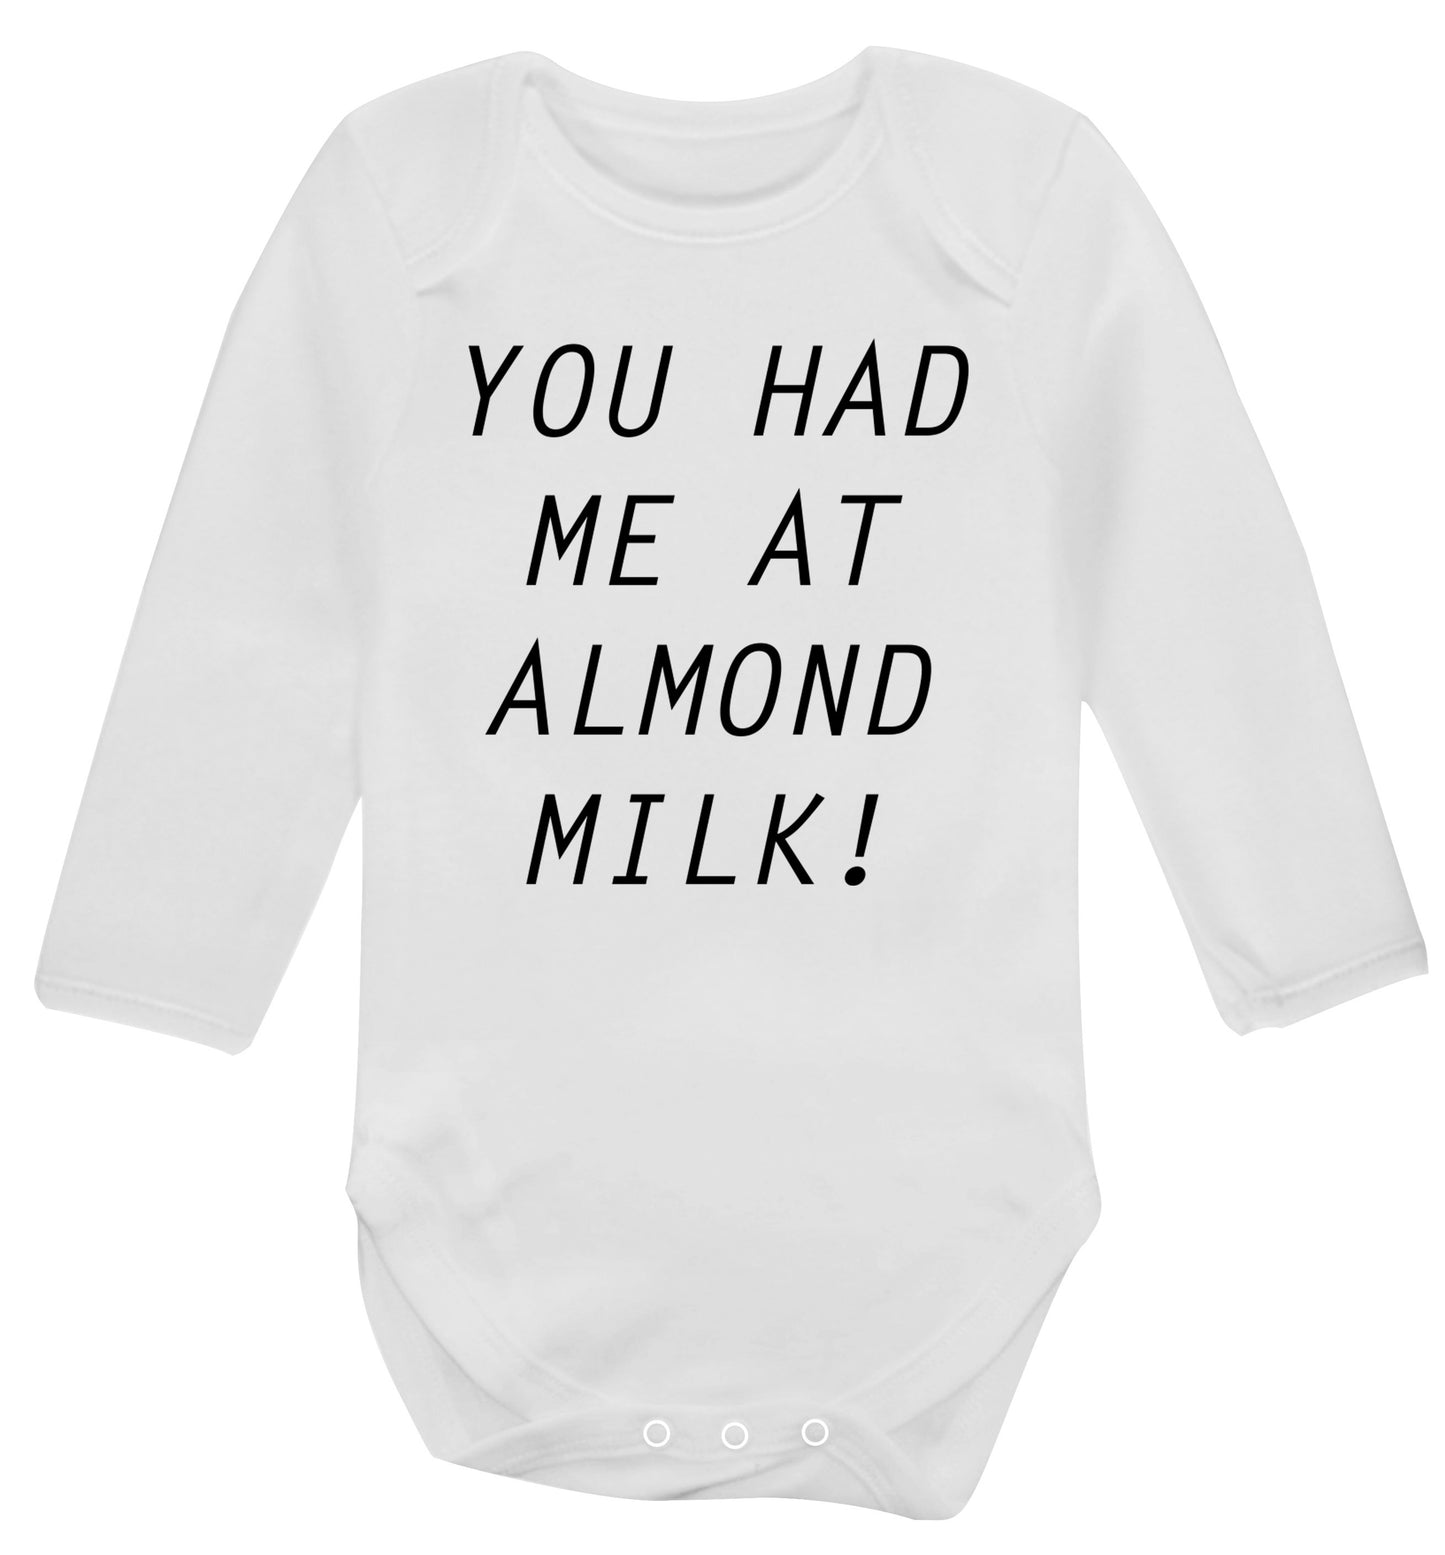 You had me at almond milk Baby Vest long sleeved white 6-12 months